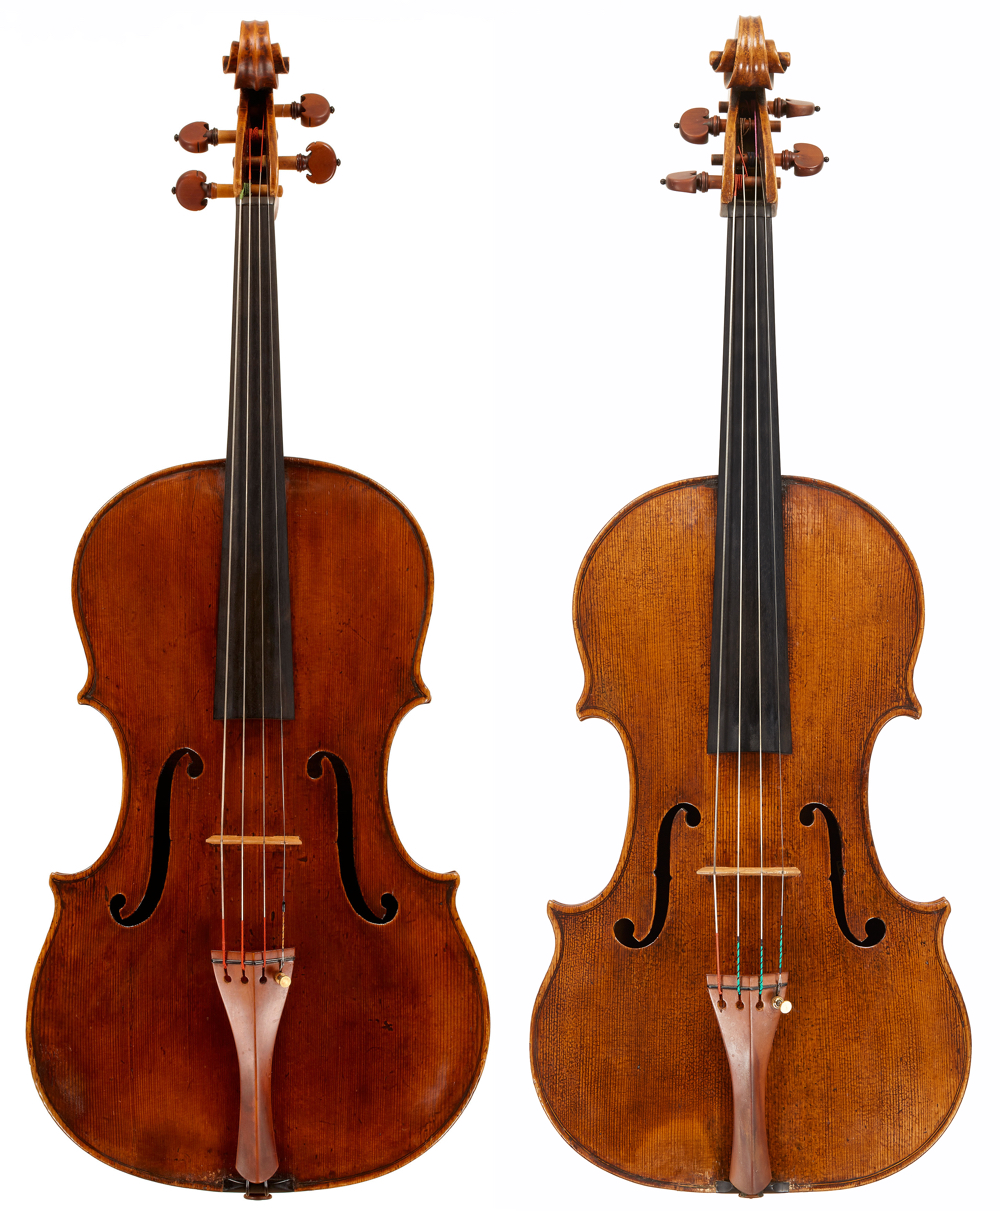 Violas made by Gaspar (left) and the Brothers Amati. Although there are superficial similarities, it is remarkable how little DNA they share. Photos: Tarisio